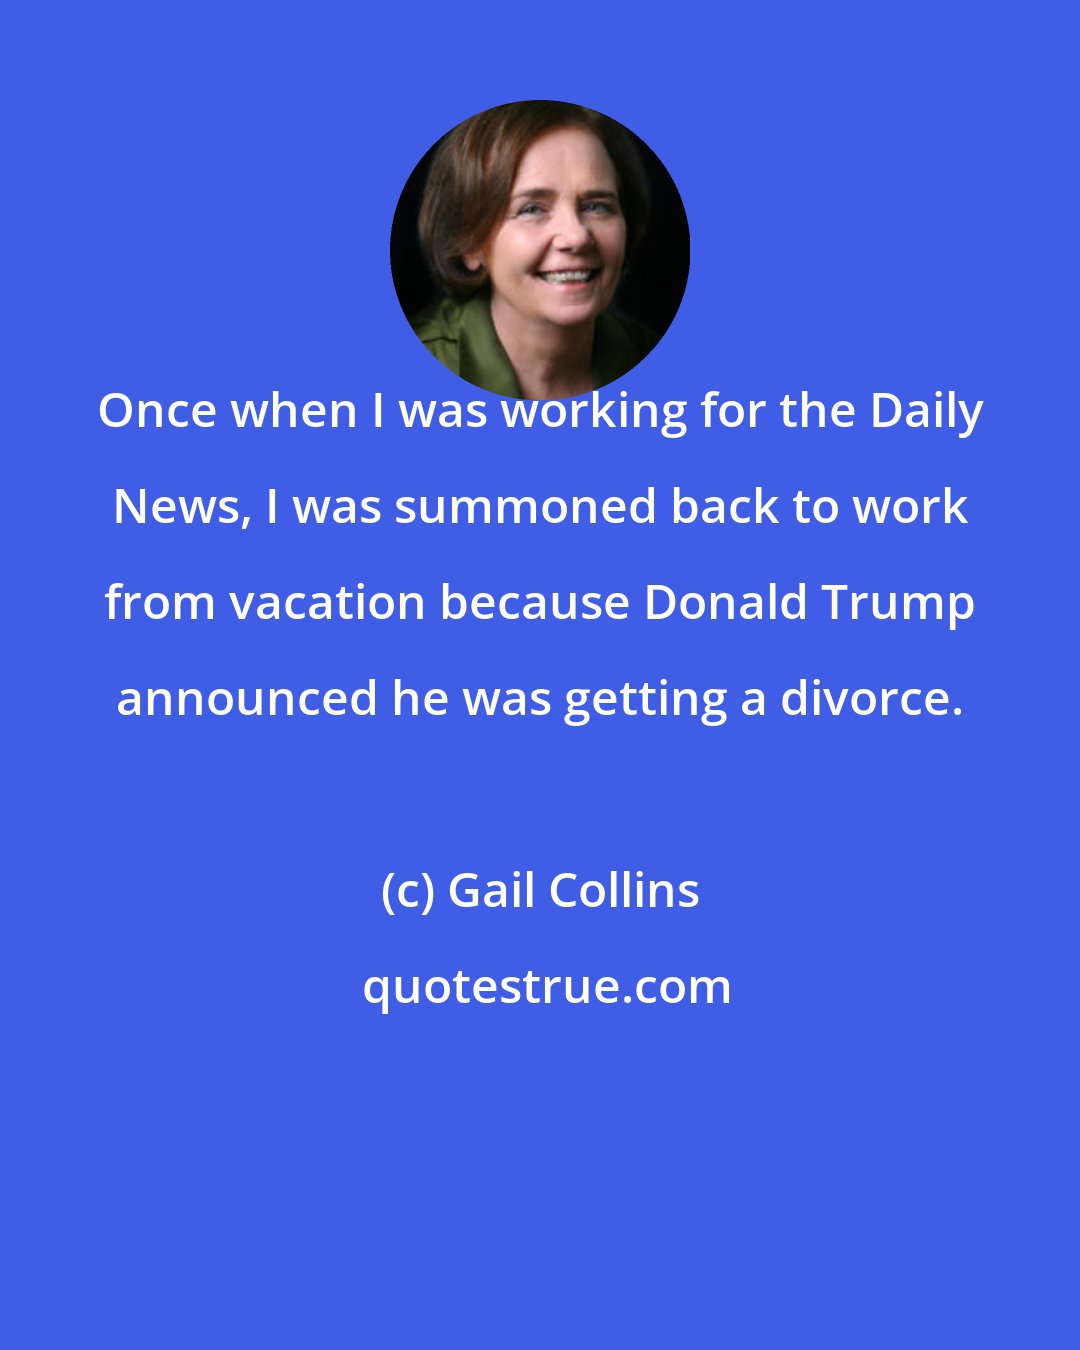 Gail Collins: Once when I was working for the Daily News, I was summoned back to work from vacation because Donald Trump announced he was getting a divorce.